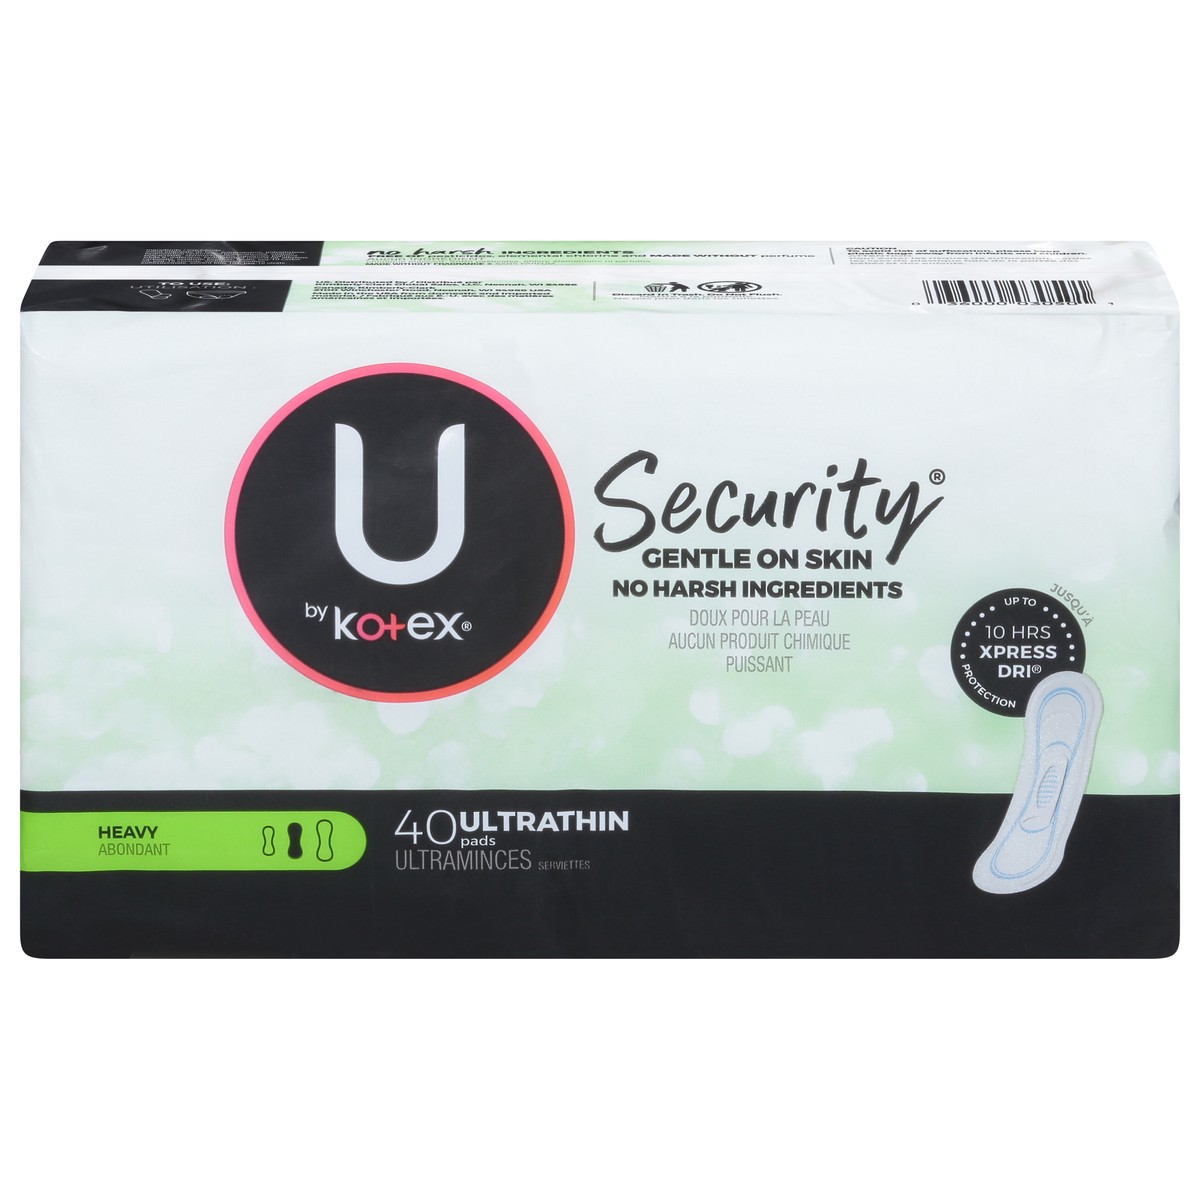 slide 13 of 16, U by Kotex Security Heavy Ultra Thin Pads 40 ea, 40 ct